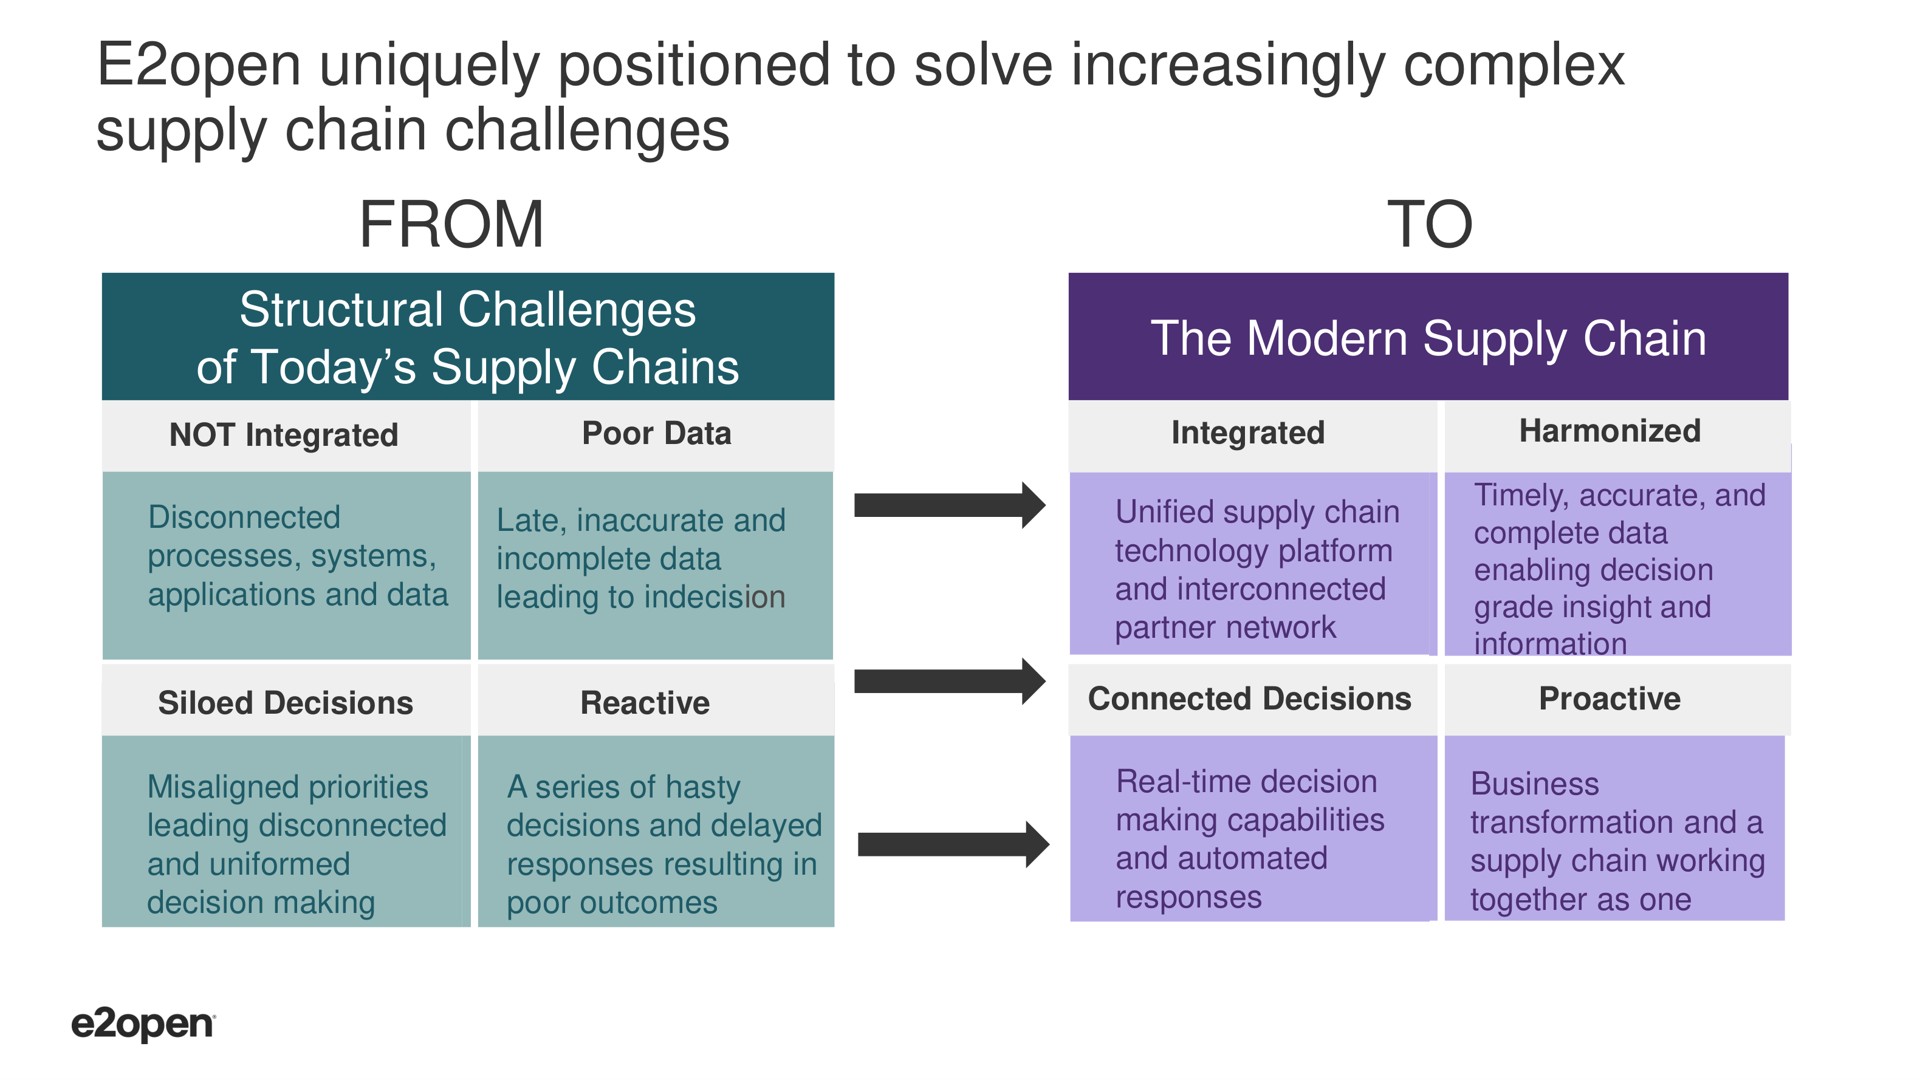 open uniquely positioned to solve increasingly complex supply chain challenges from to | E2open